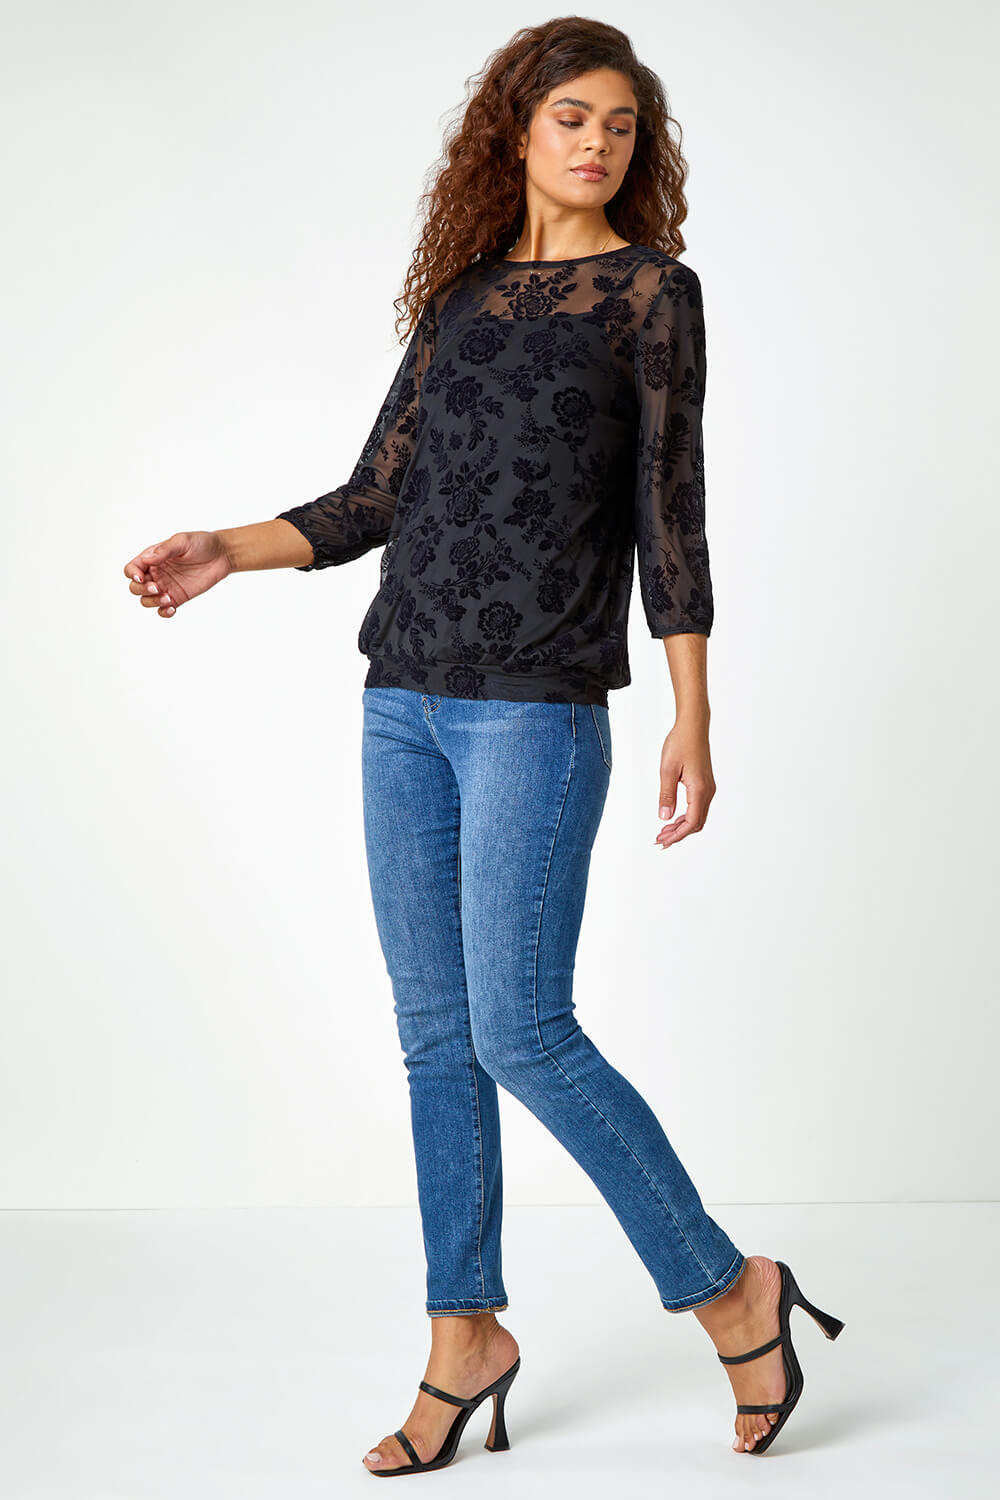 Black Textured Floral Print Mesh Stretch Top, Image 2 of 5